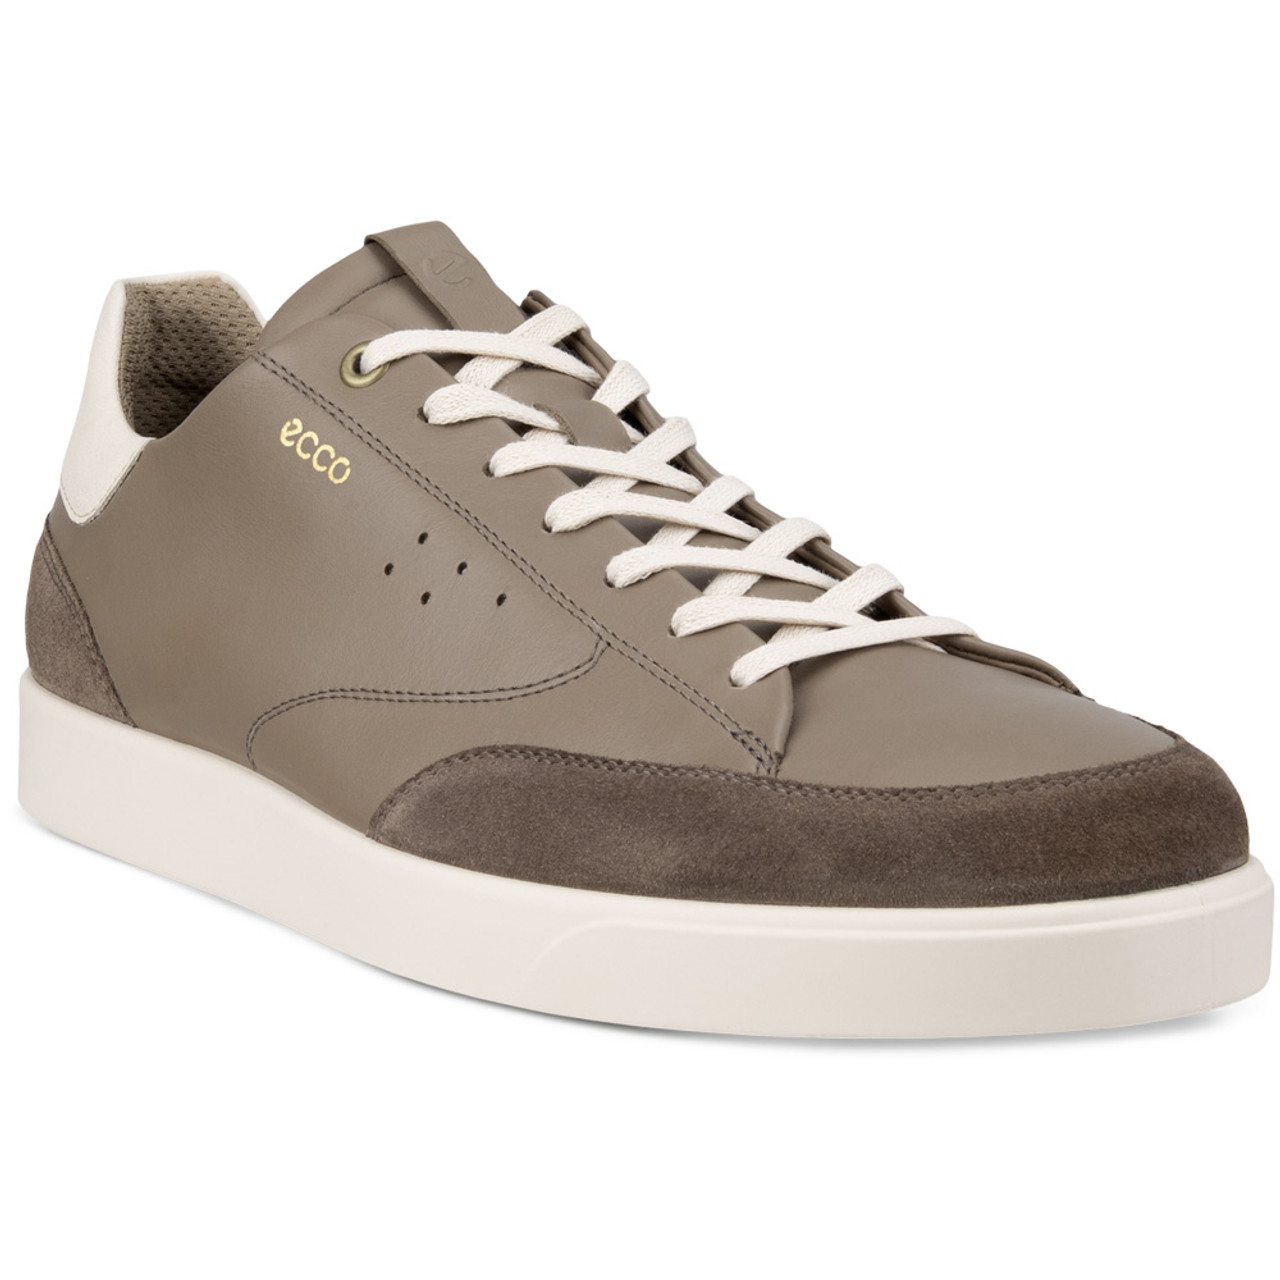 Ecco, Shoes, Brand New Ecco Oxford Suede Shoes